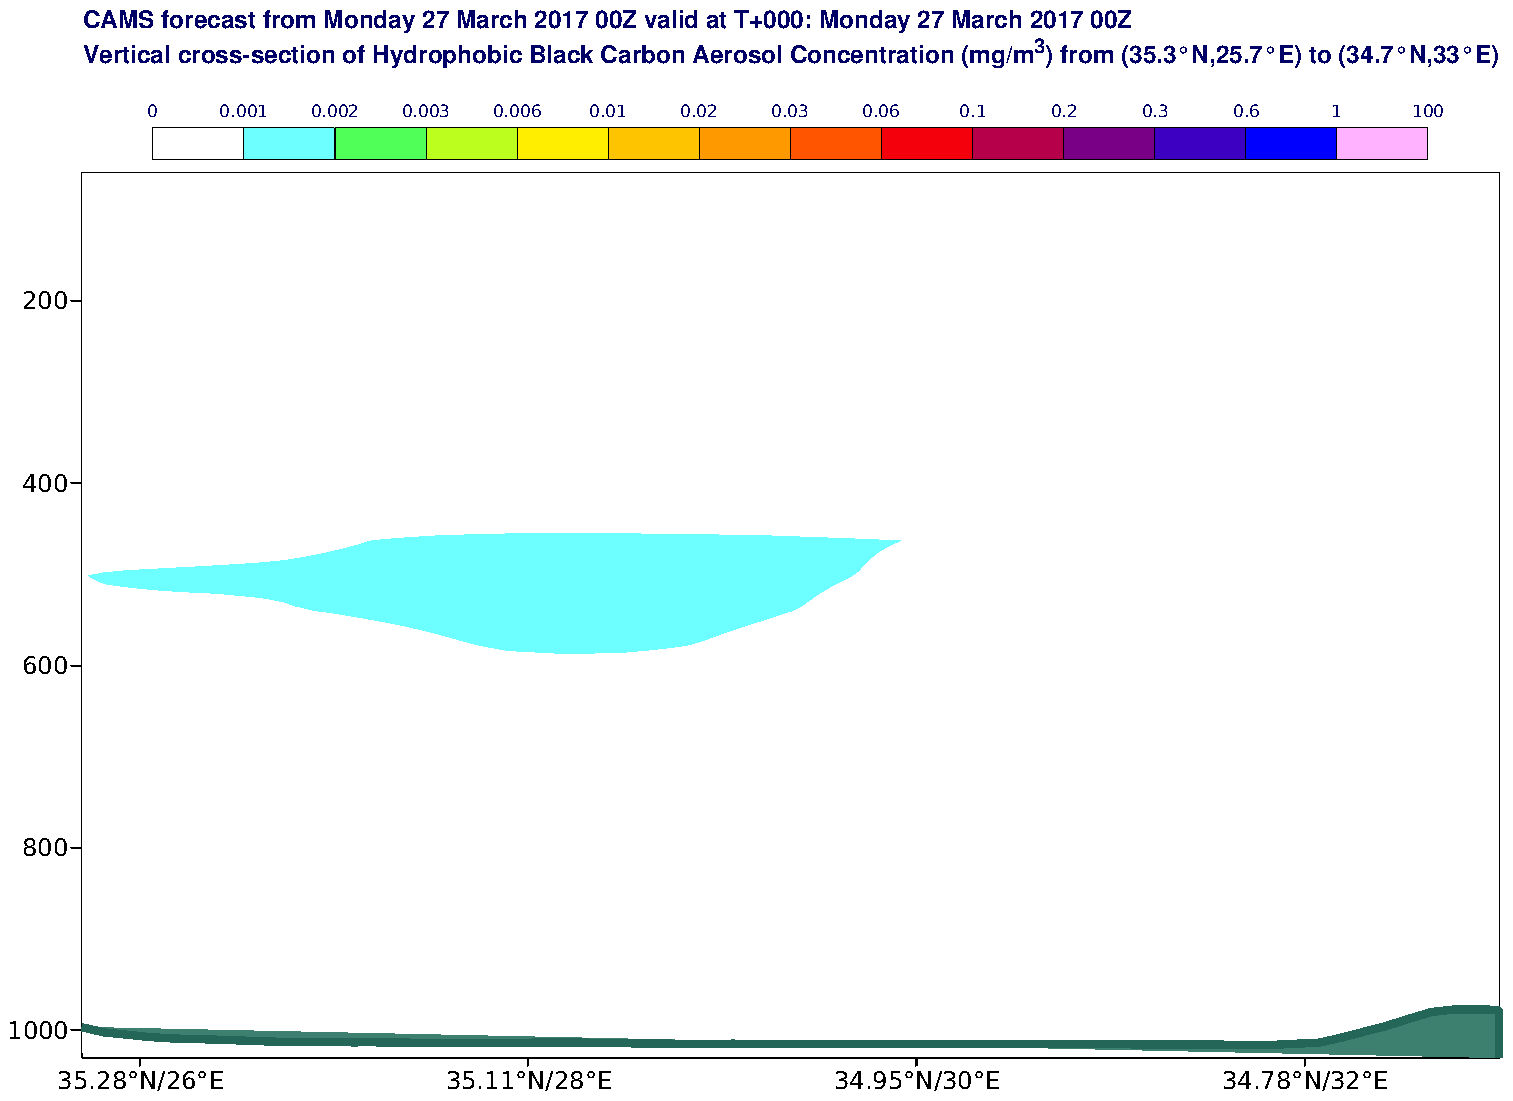 Vertical cross-section of Hydrophobic Black Carbon Aerosol Concentration (mg/m3) valid at T0 - 2017-03-27 00:00